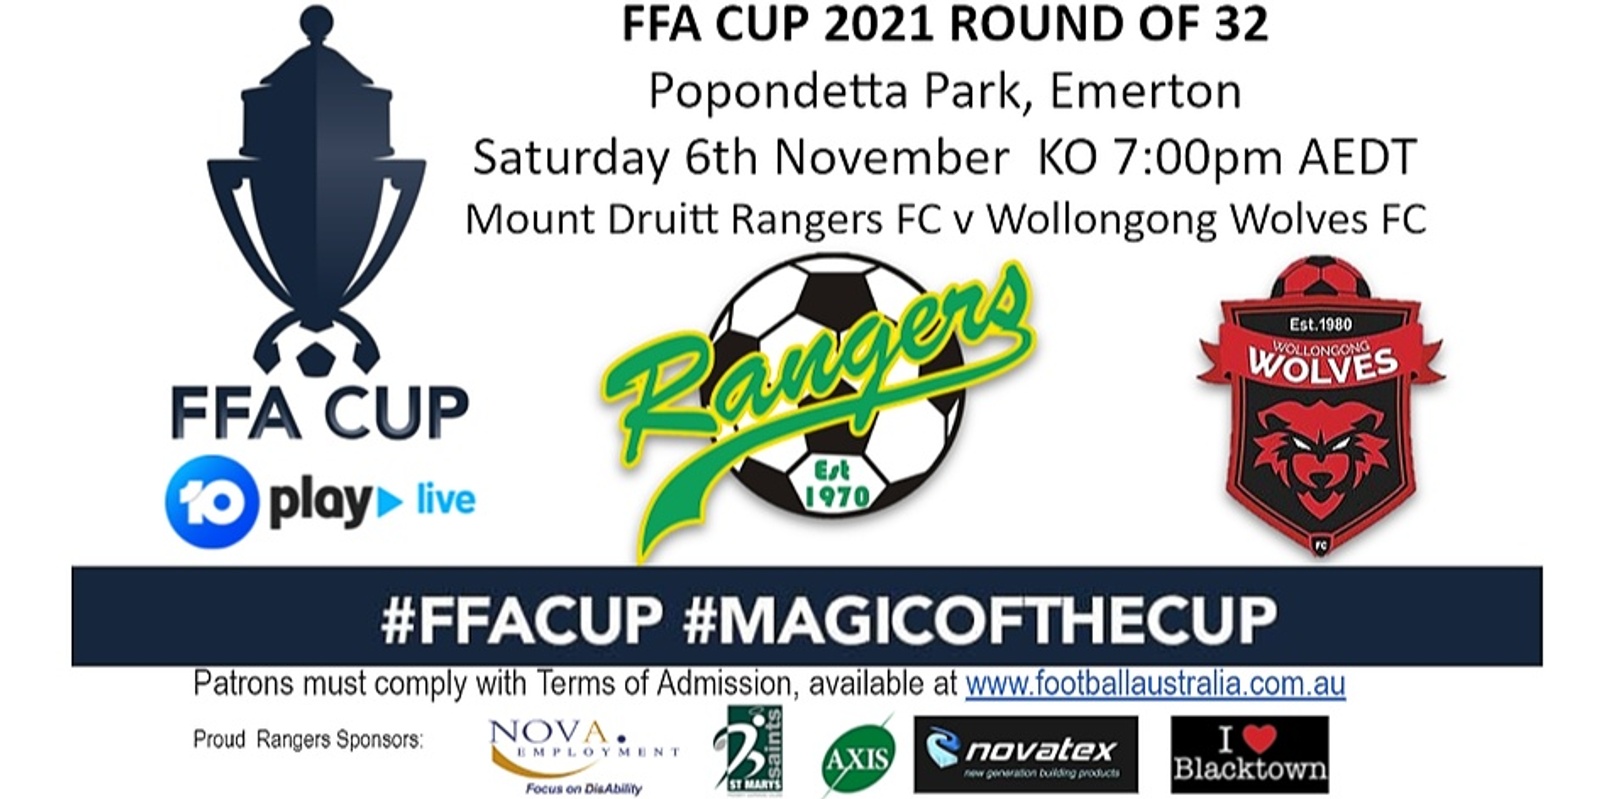 Banner image for FFA Cup 2021 Round of 32  Mount Druitt Rangers FC v Wollongong Wolves FC